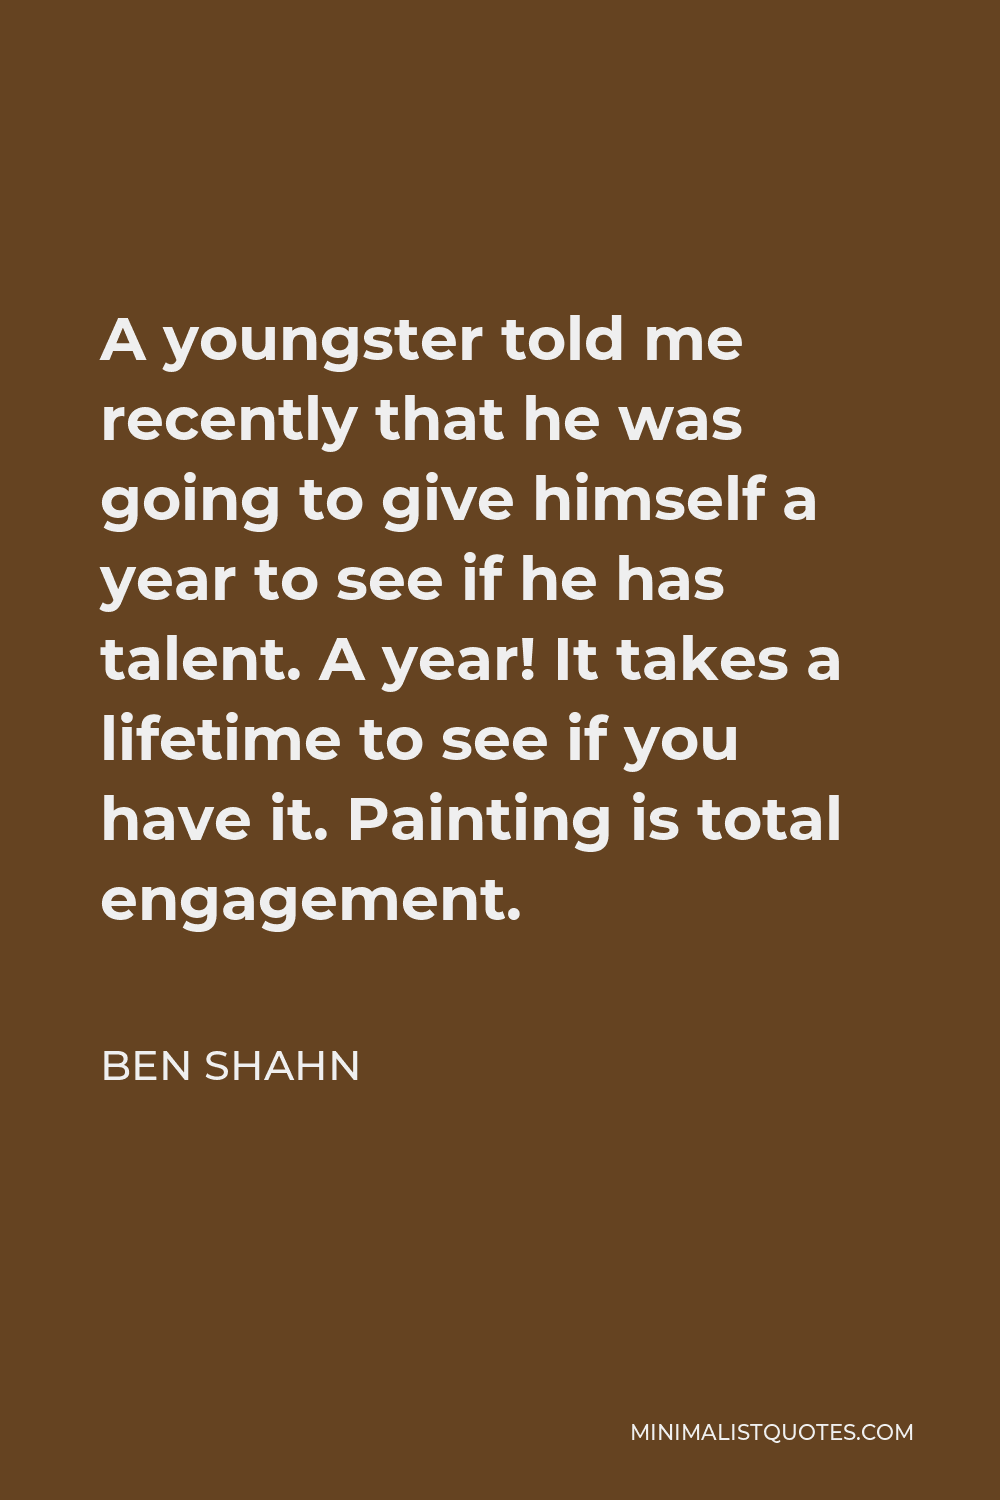 Ben Shahn Quote - A youngster told me recently that he was going to give himself a year to see if he has talent. A year! It takes a lifetime to see if you have it. Painting is total engagement.